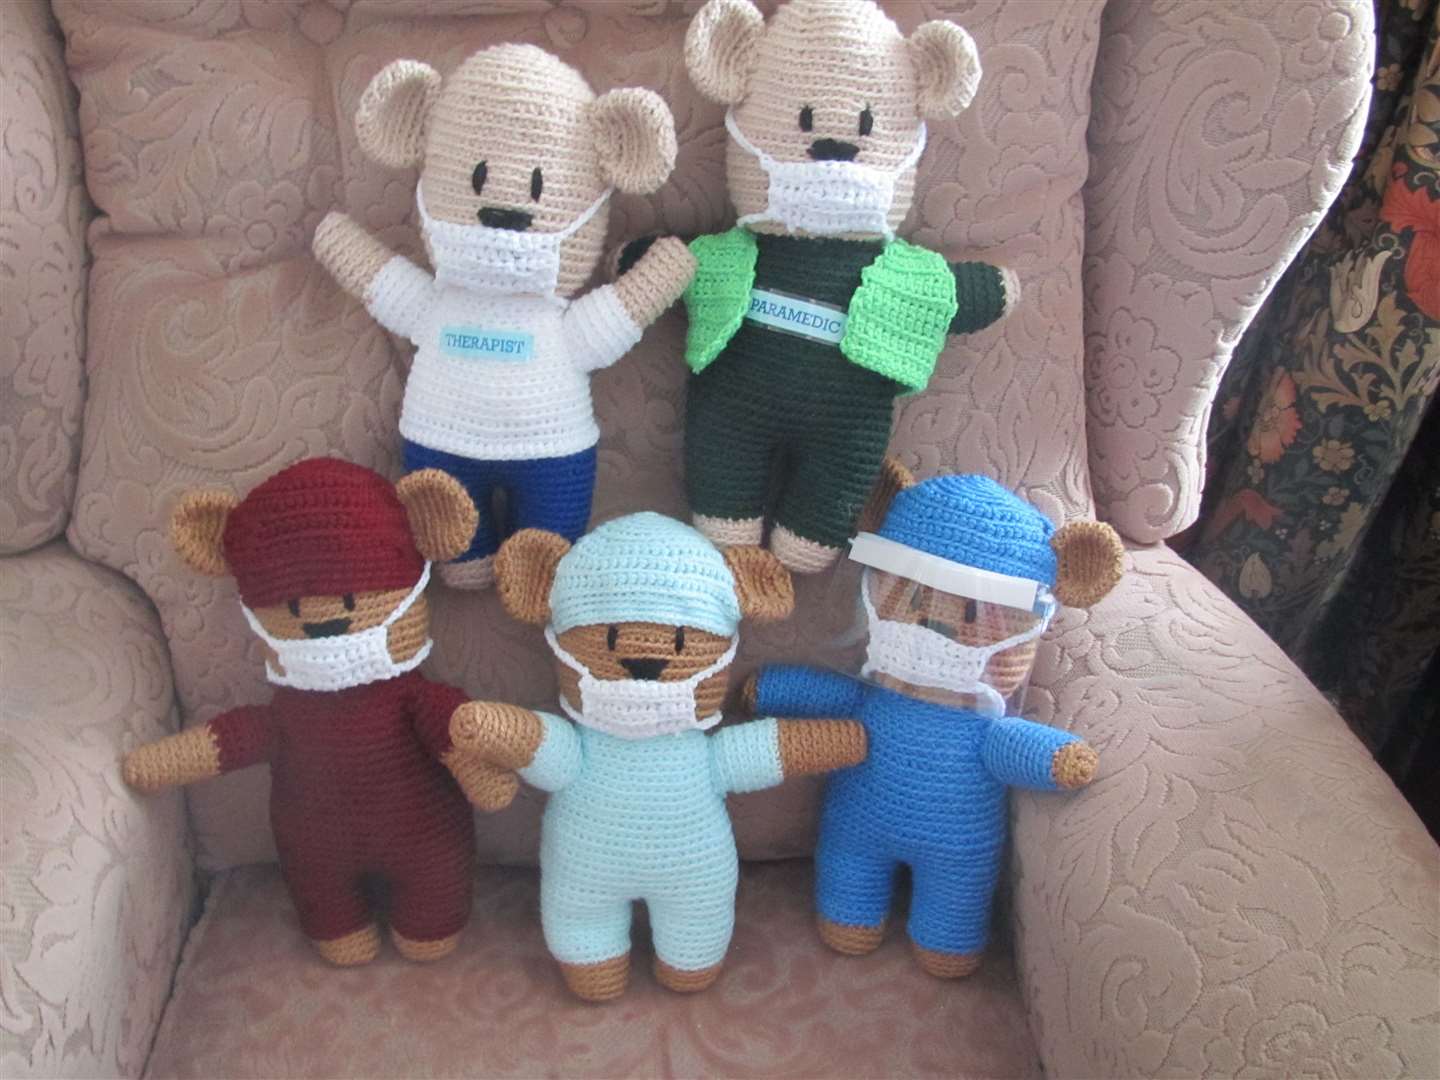 A variety of frontline worker bears were made.